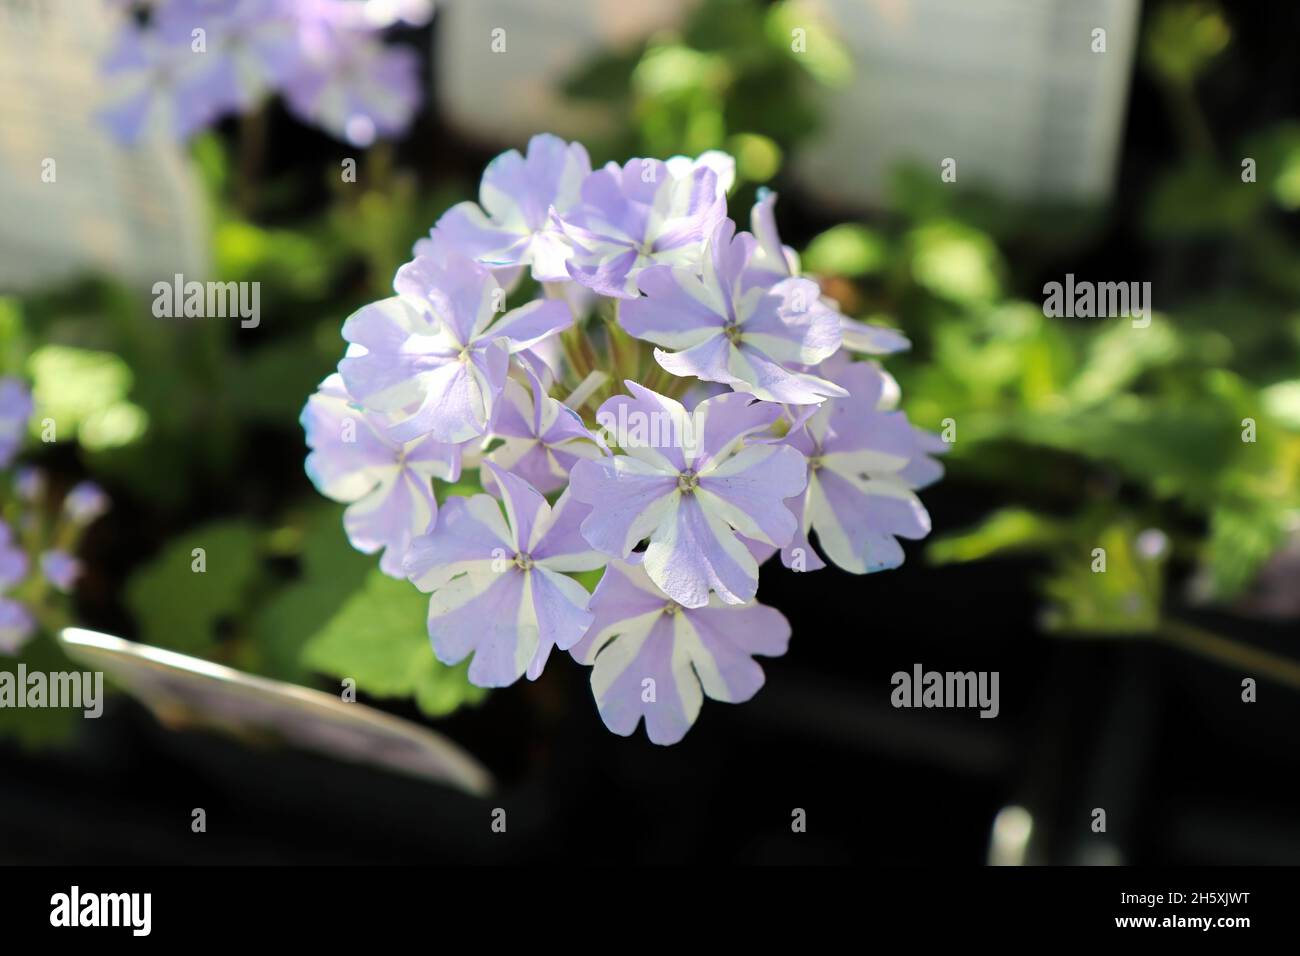 A cluster of purple and white striped verbena flowers Stock Photo